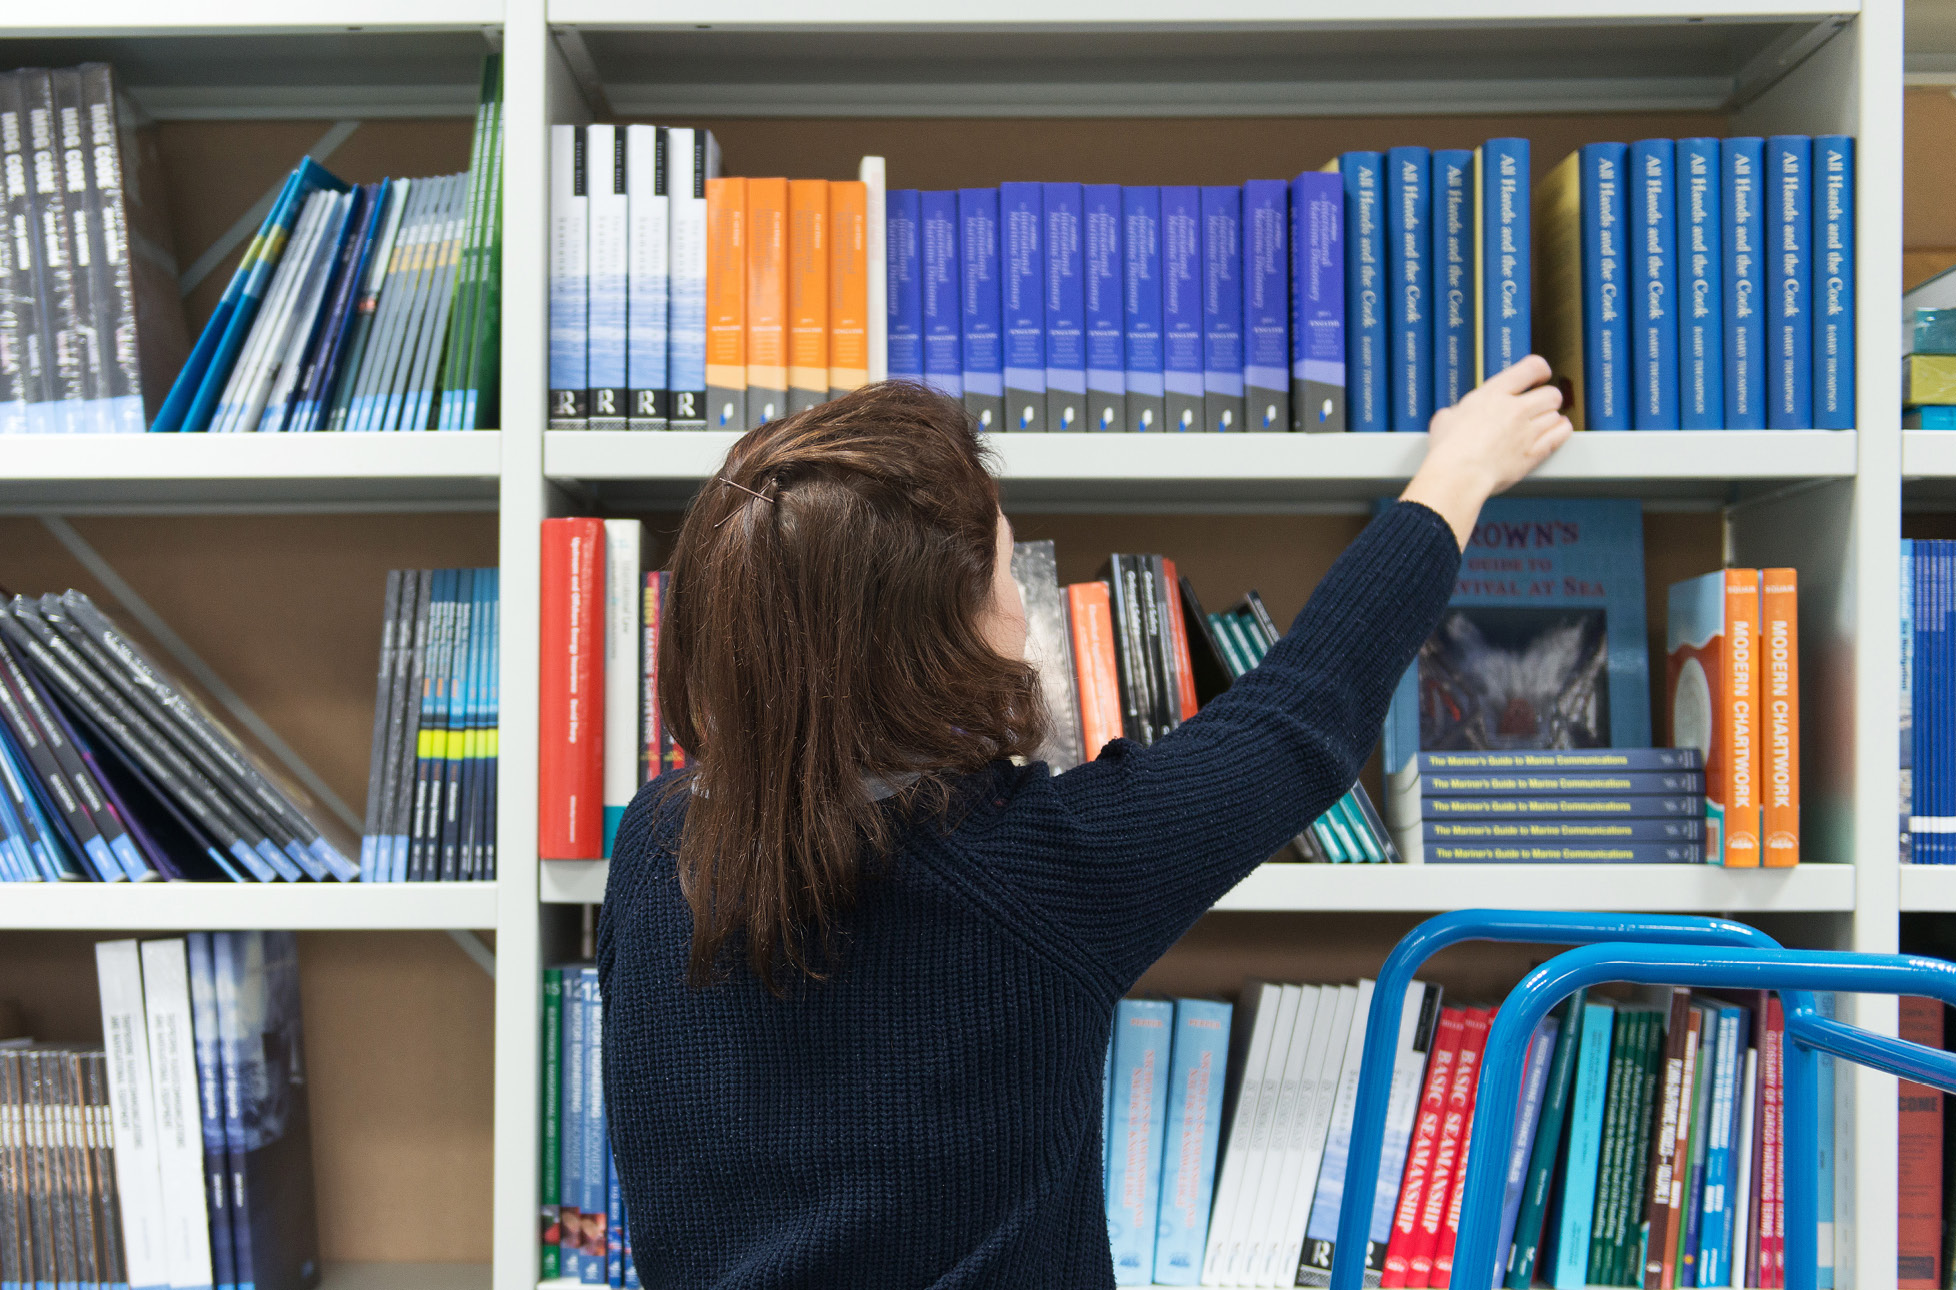 A woman picking out a book from the library shelf